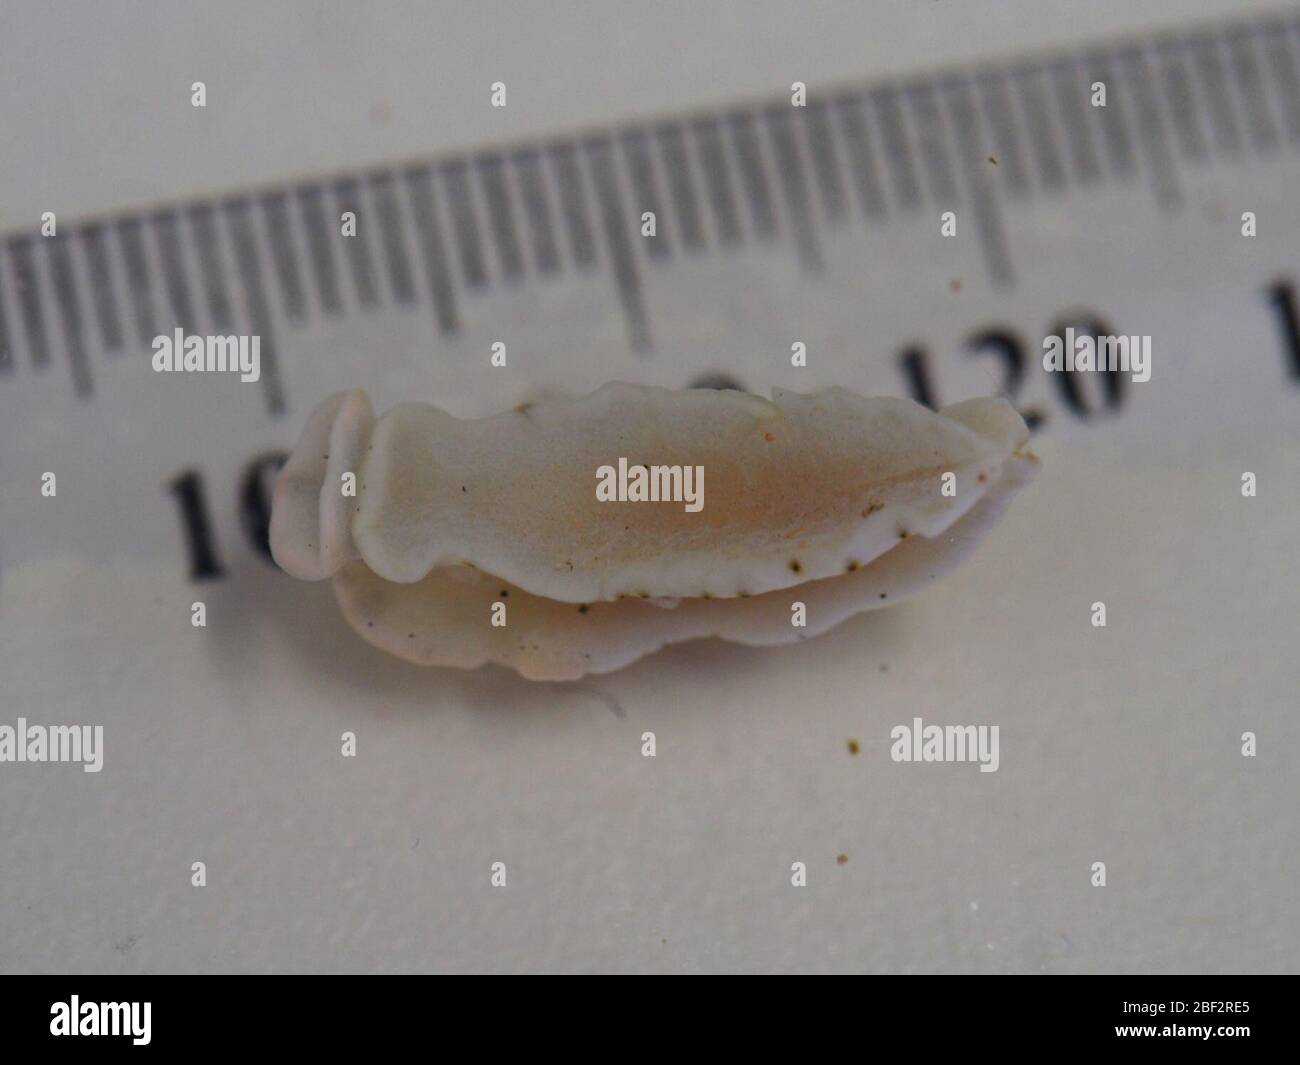 Dermatobranchus sp. Photo Identifier: IN FOLDER; Photographer: ? Permit # N/A Sequences: N/A; Transcriptome: Sequenced; Genome: N/A ID#1361, Separate photos in e-mail21 Sep 20181 Stock Photo